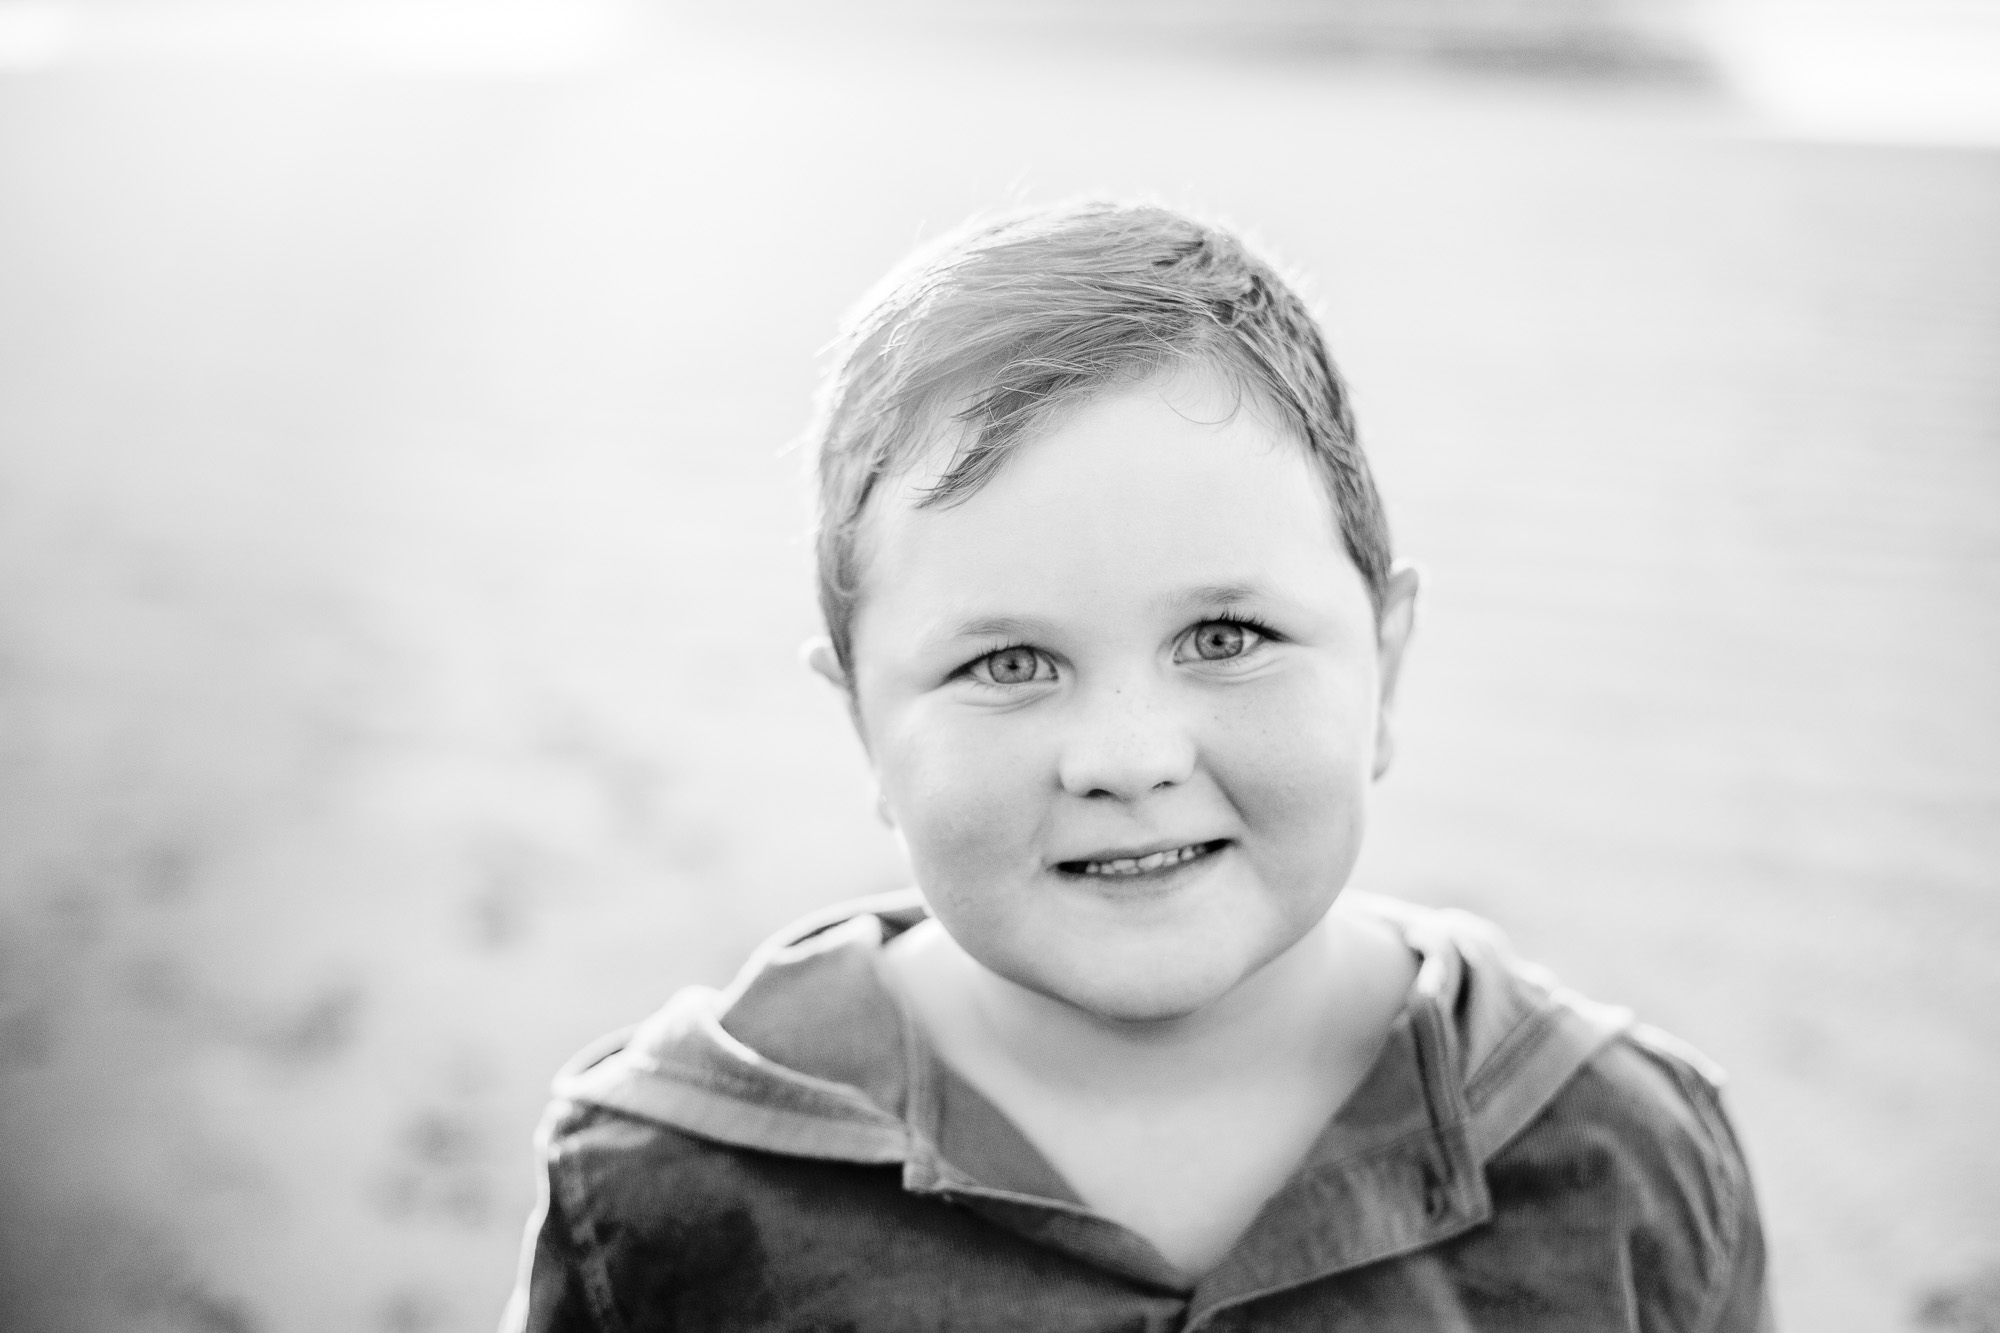 Black and white image of young boy at beach.